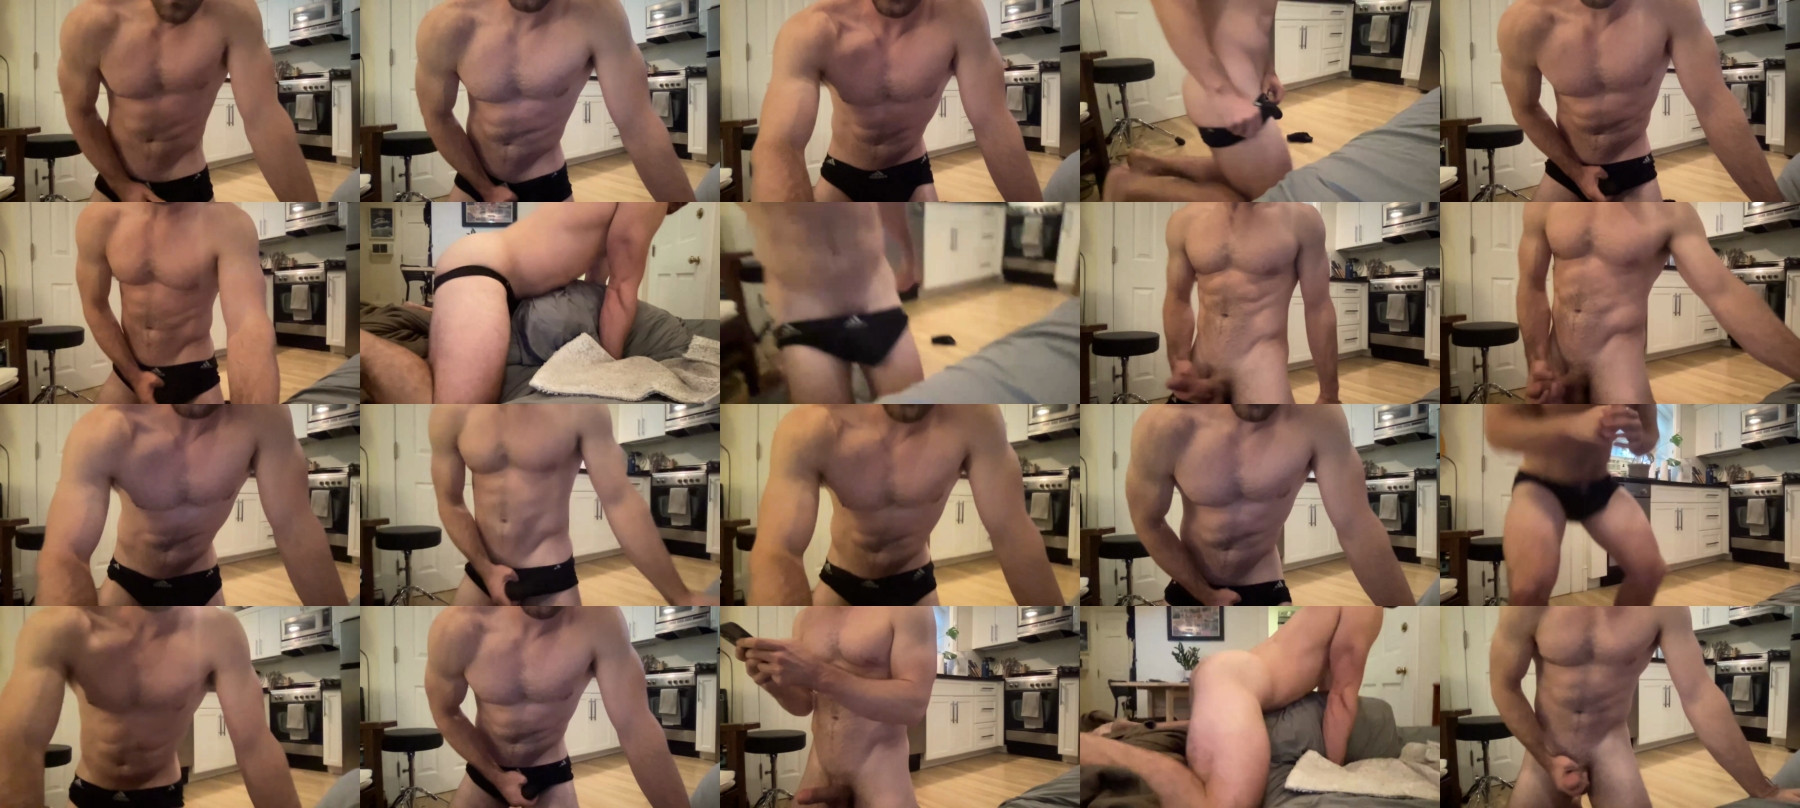 Bigcollegecock69690  23-06-2021 Male Topless